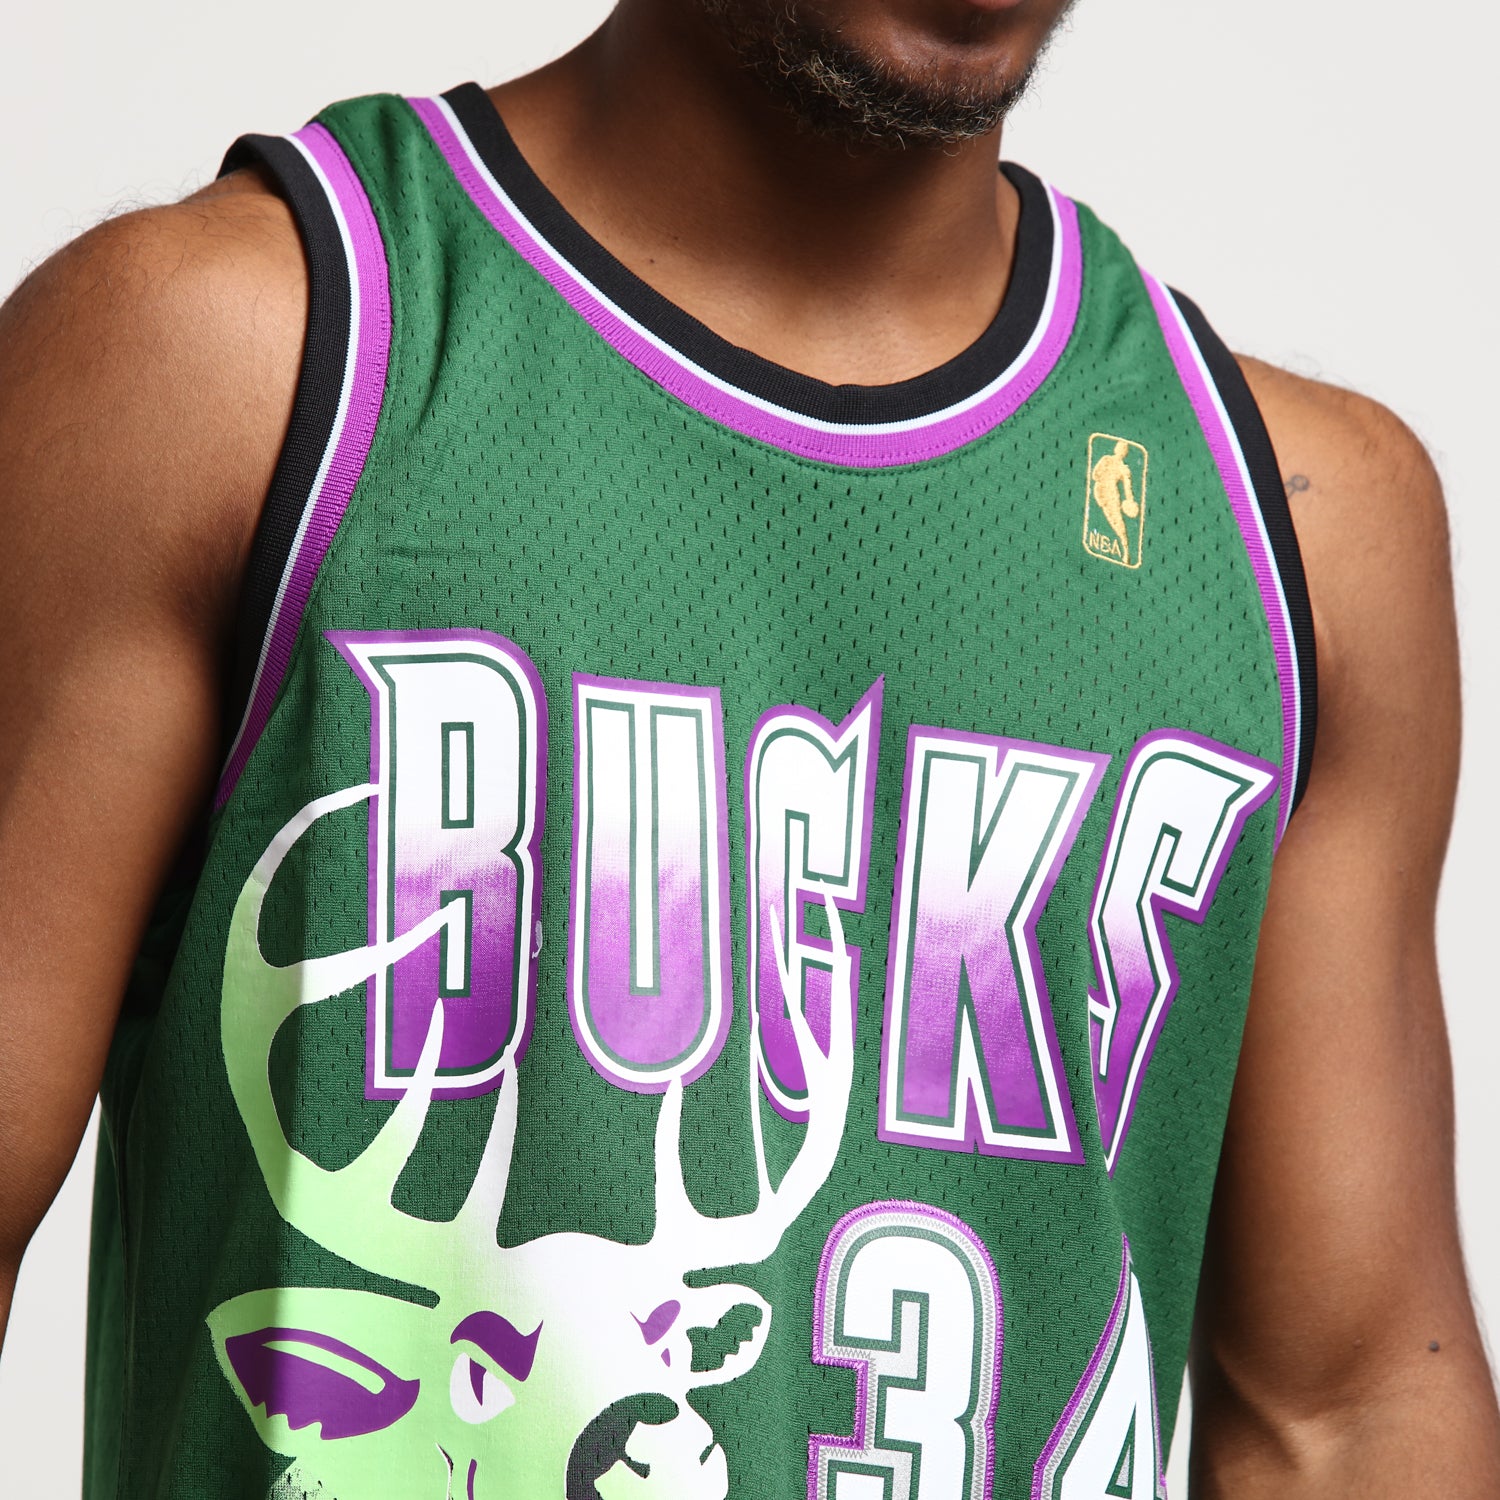 ray allen mitchell and ness jersey